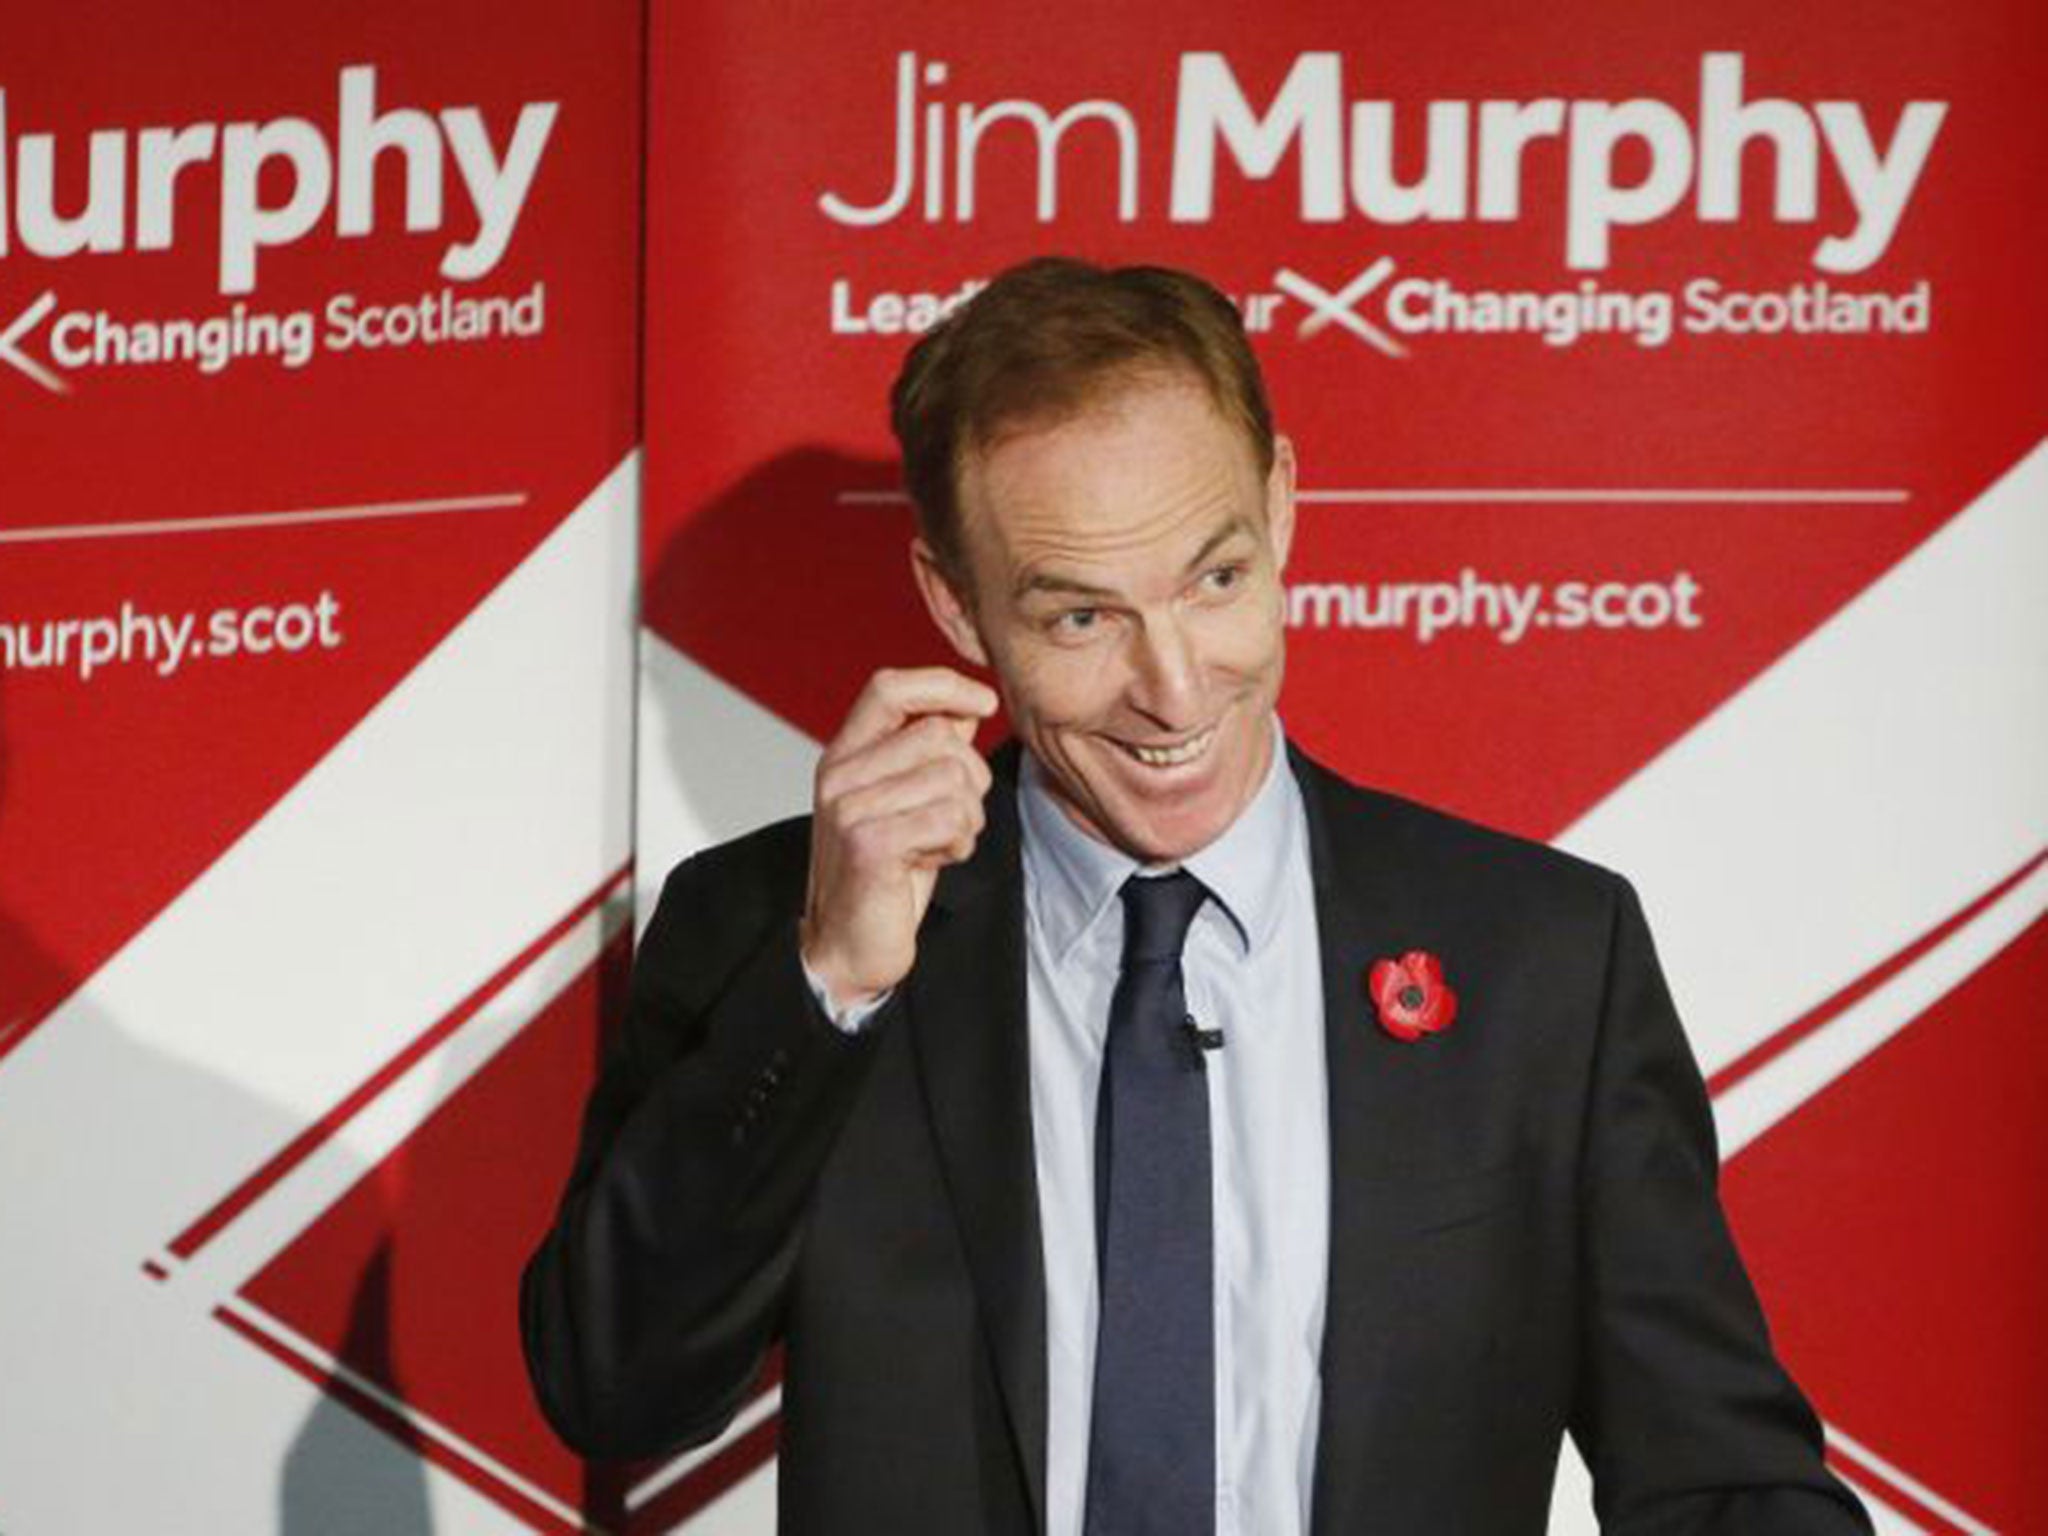 Jim Murphy launches his campaign in Edinburgh on Saturday